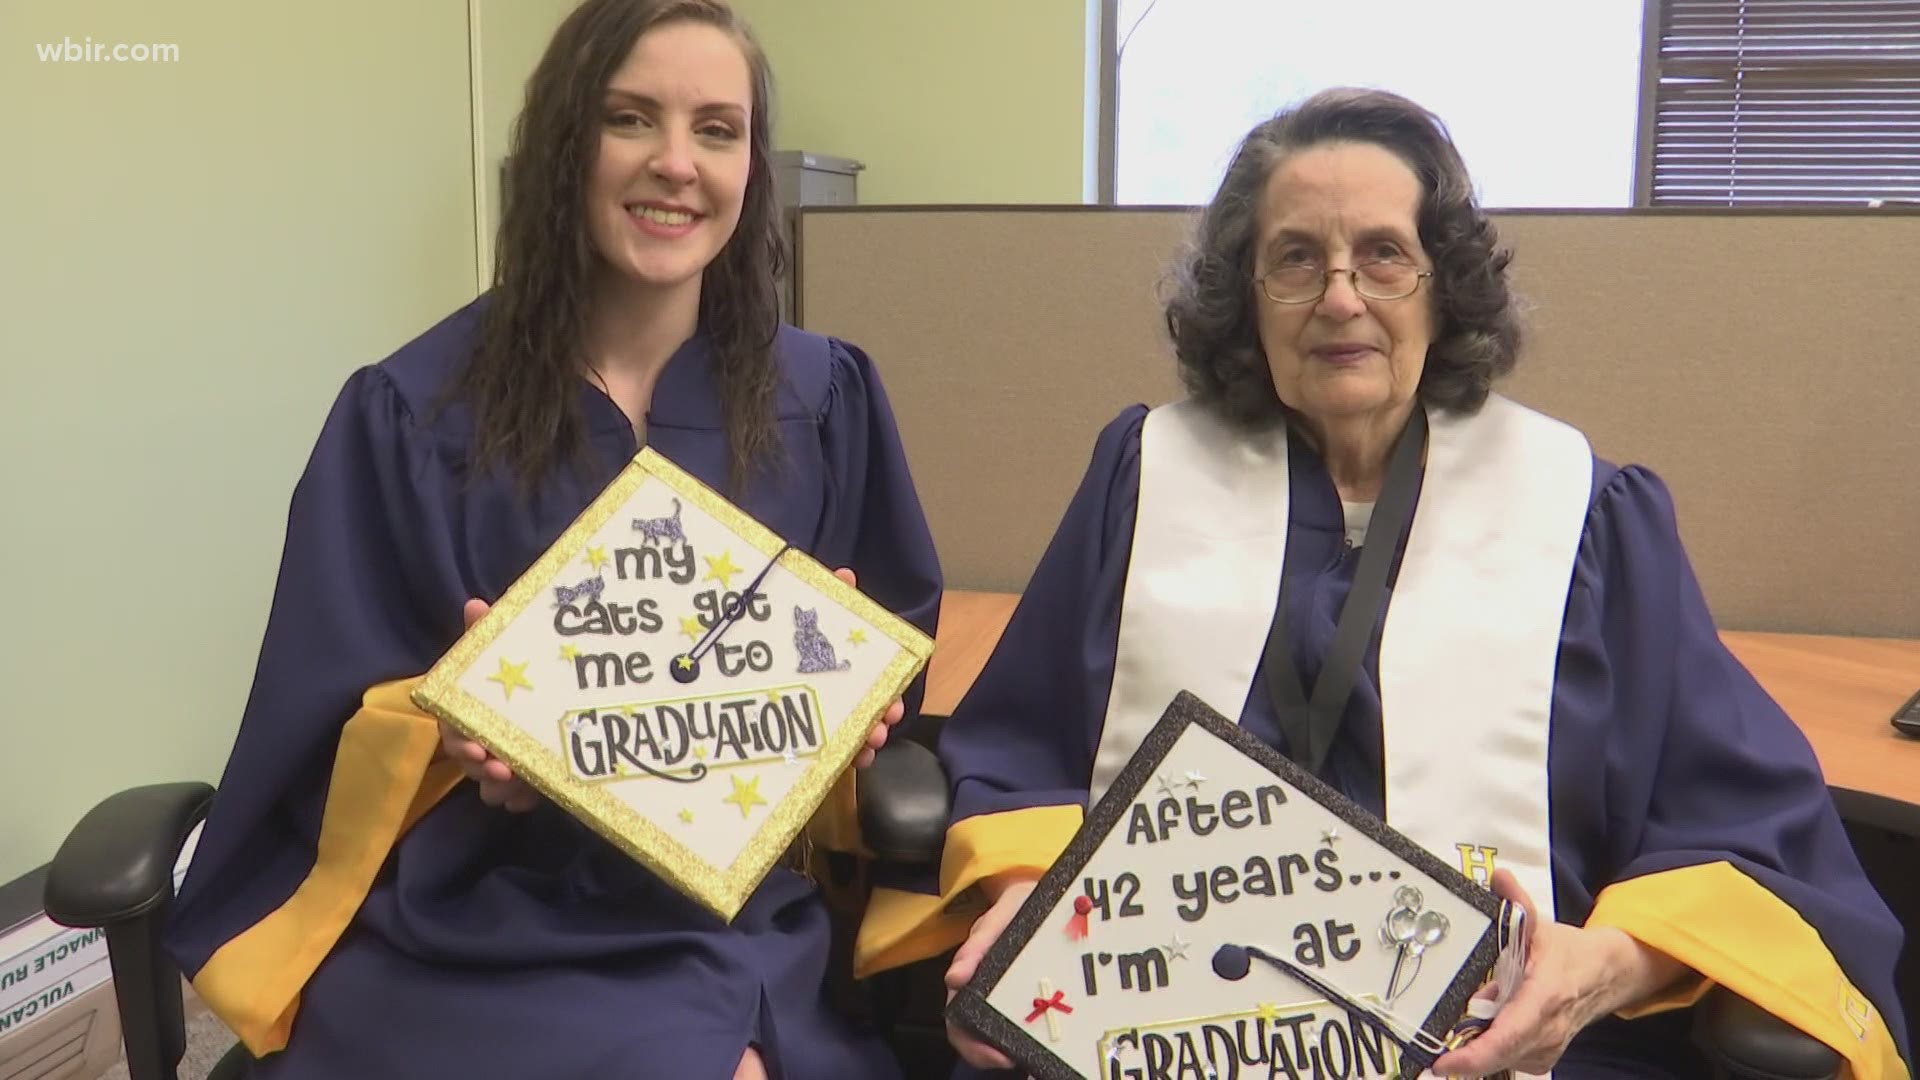 57 years after graduating high school, Pat Ormond graduated from the University of Tennessee Chattanooga with her granddaughter, Melody.